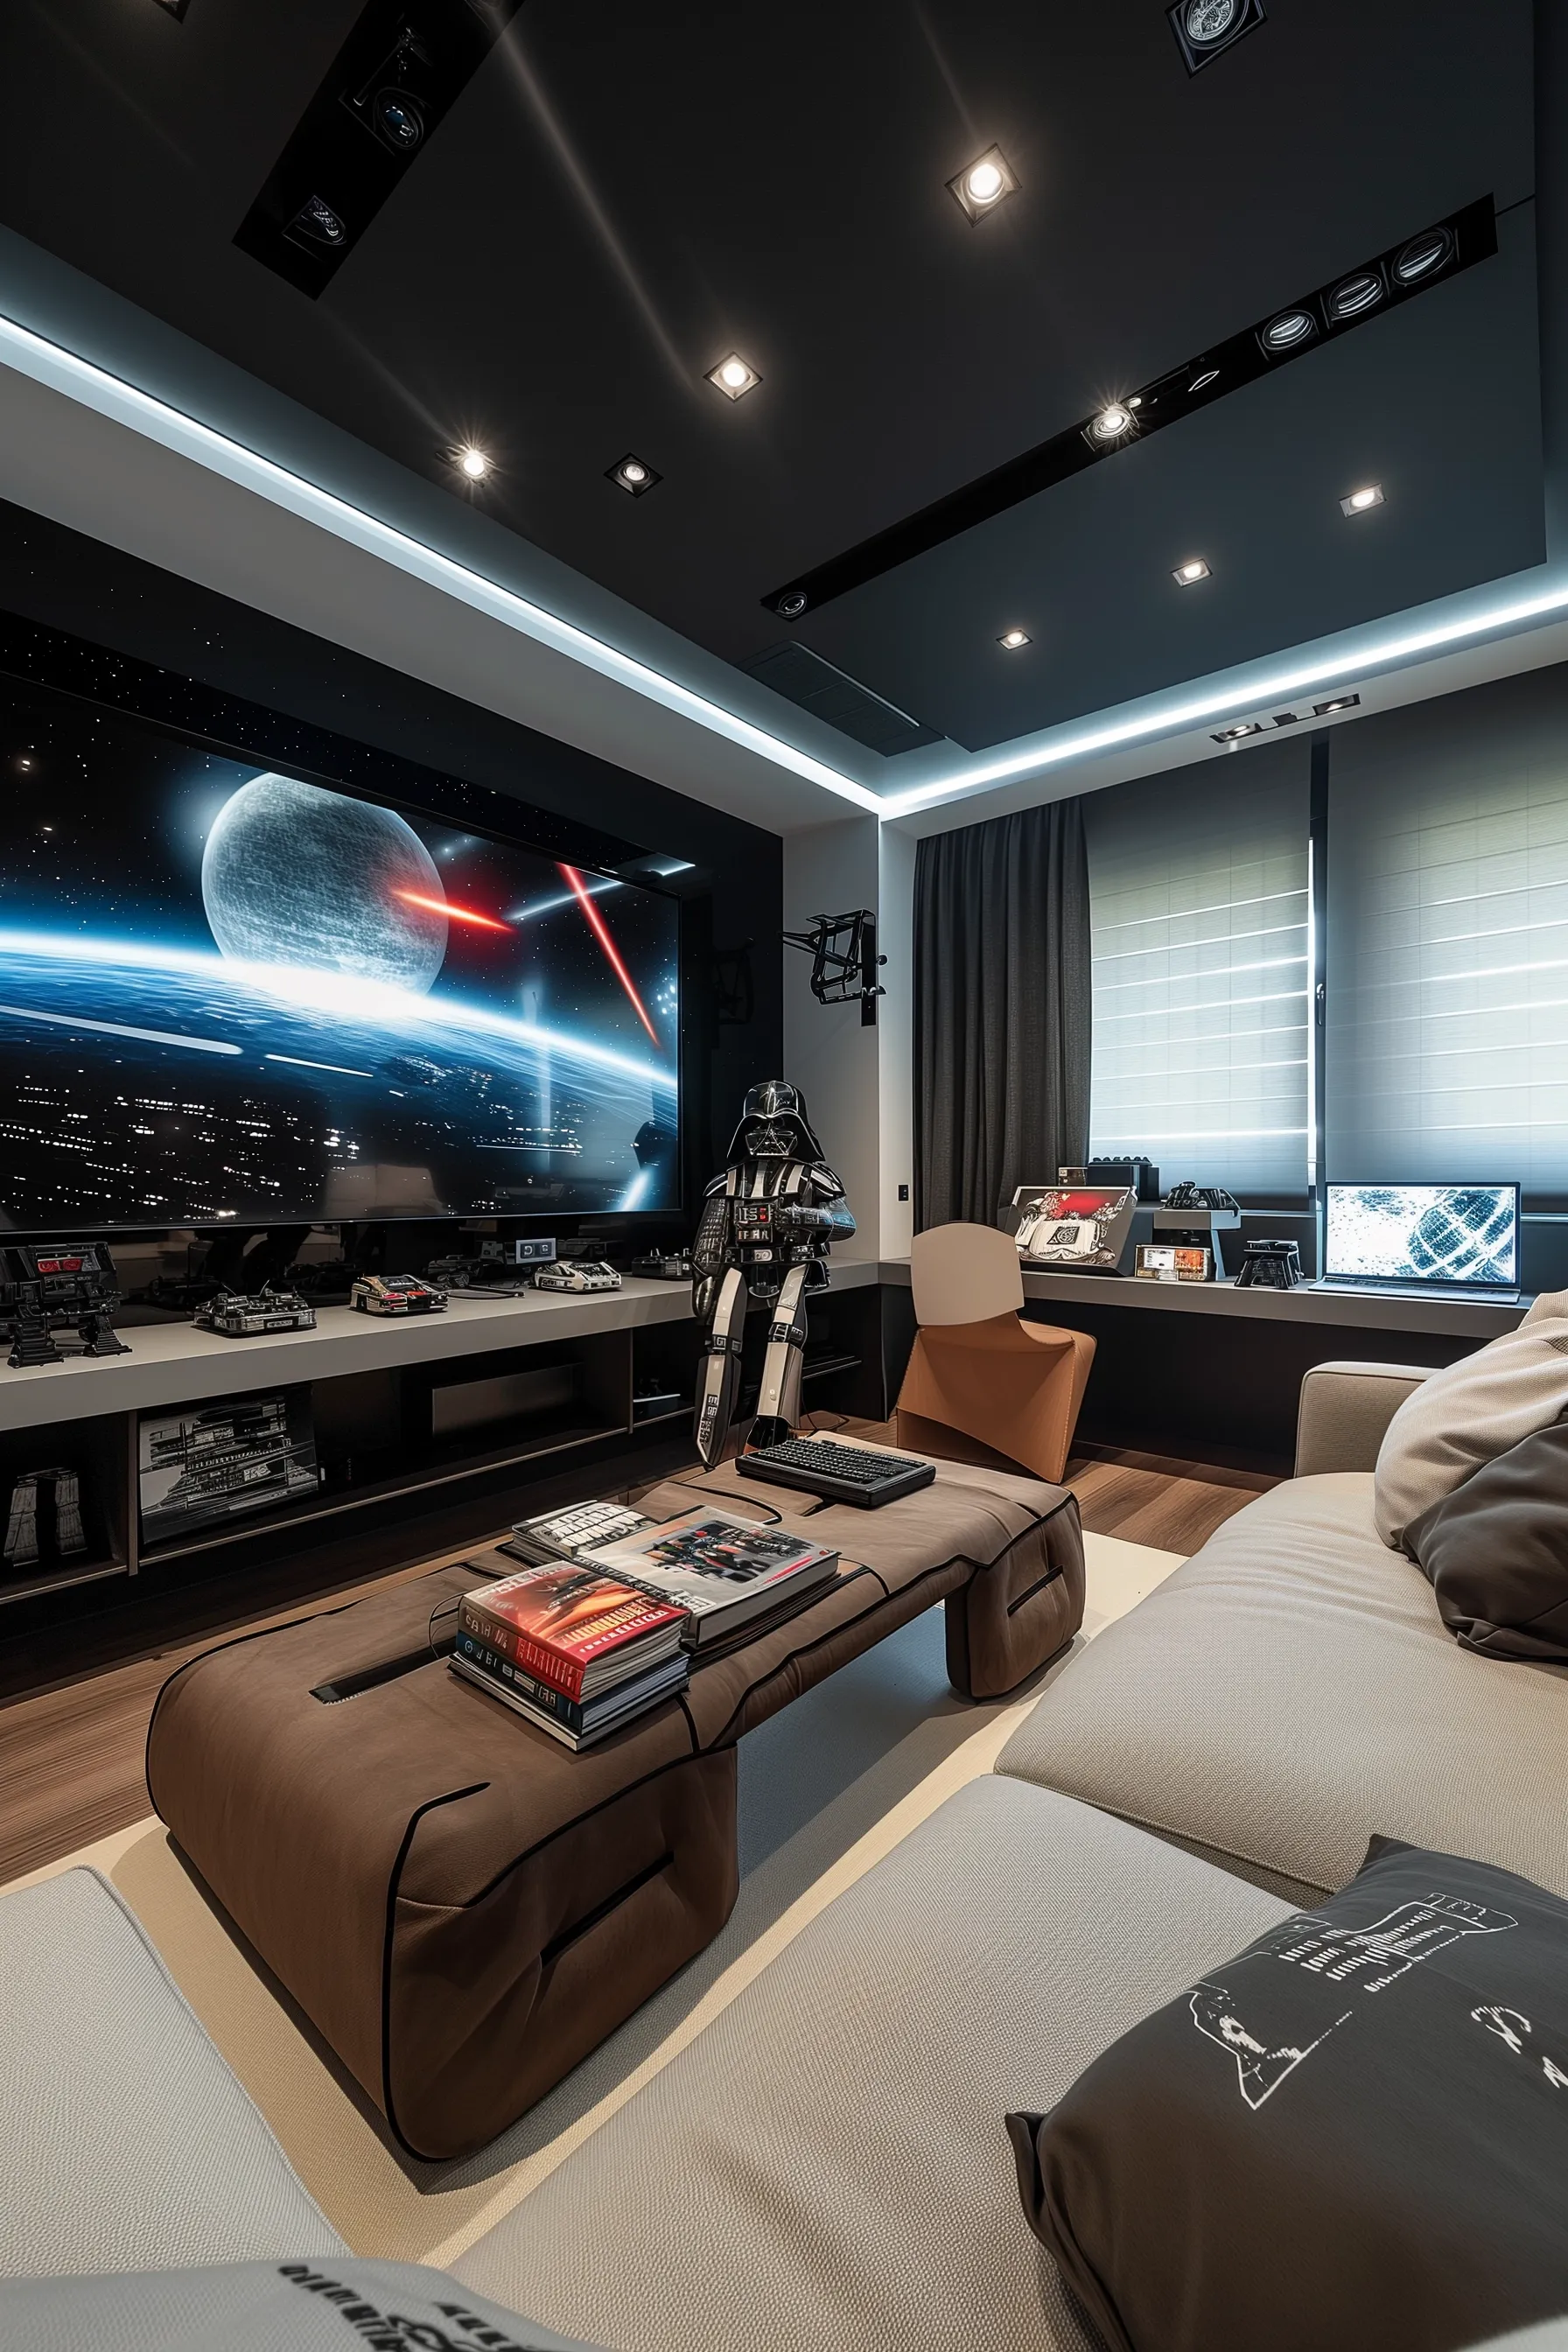 A star wars themed living room